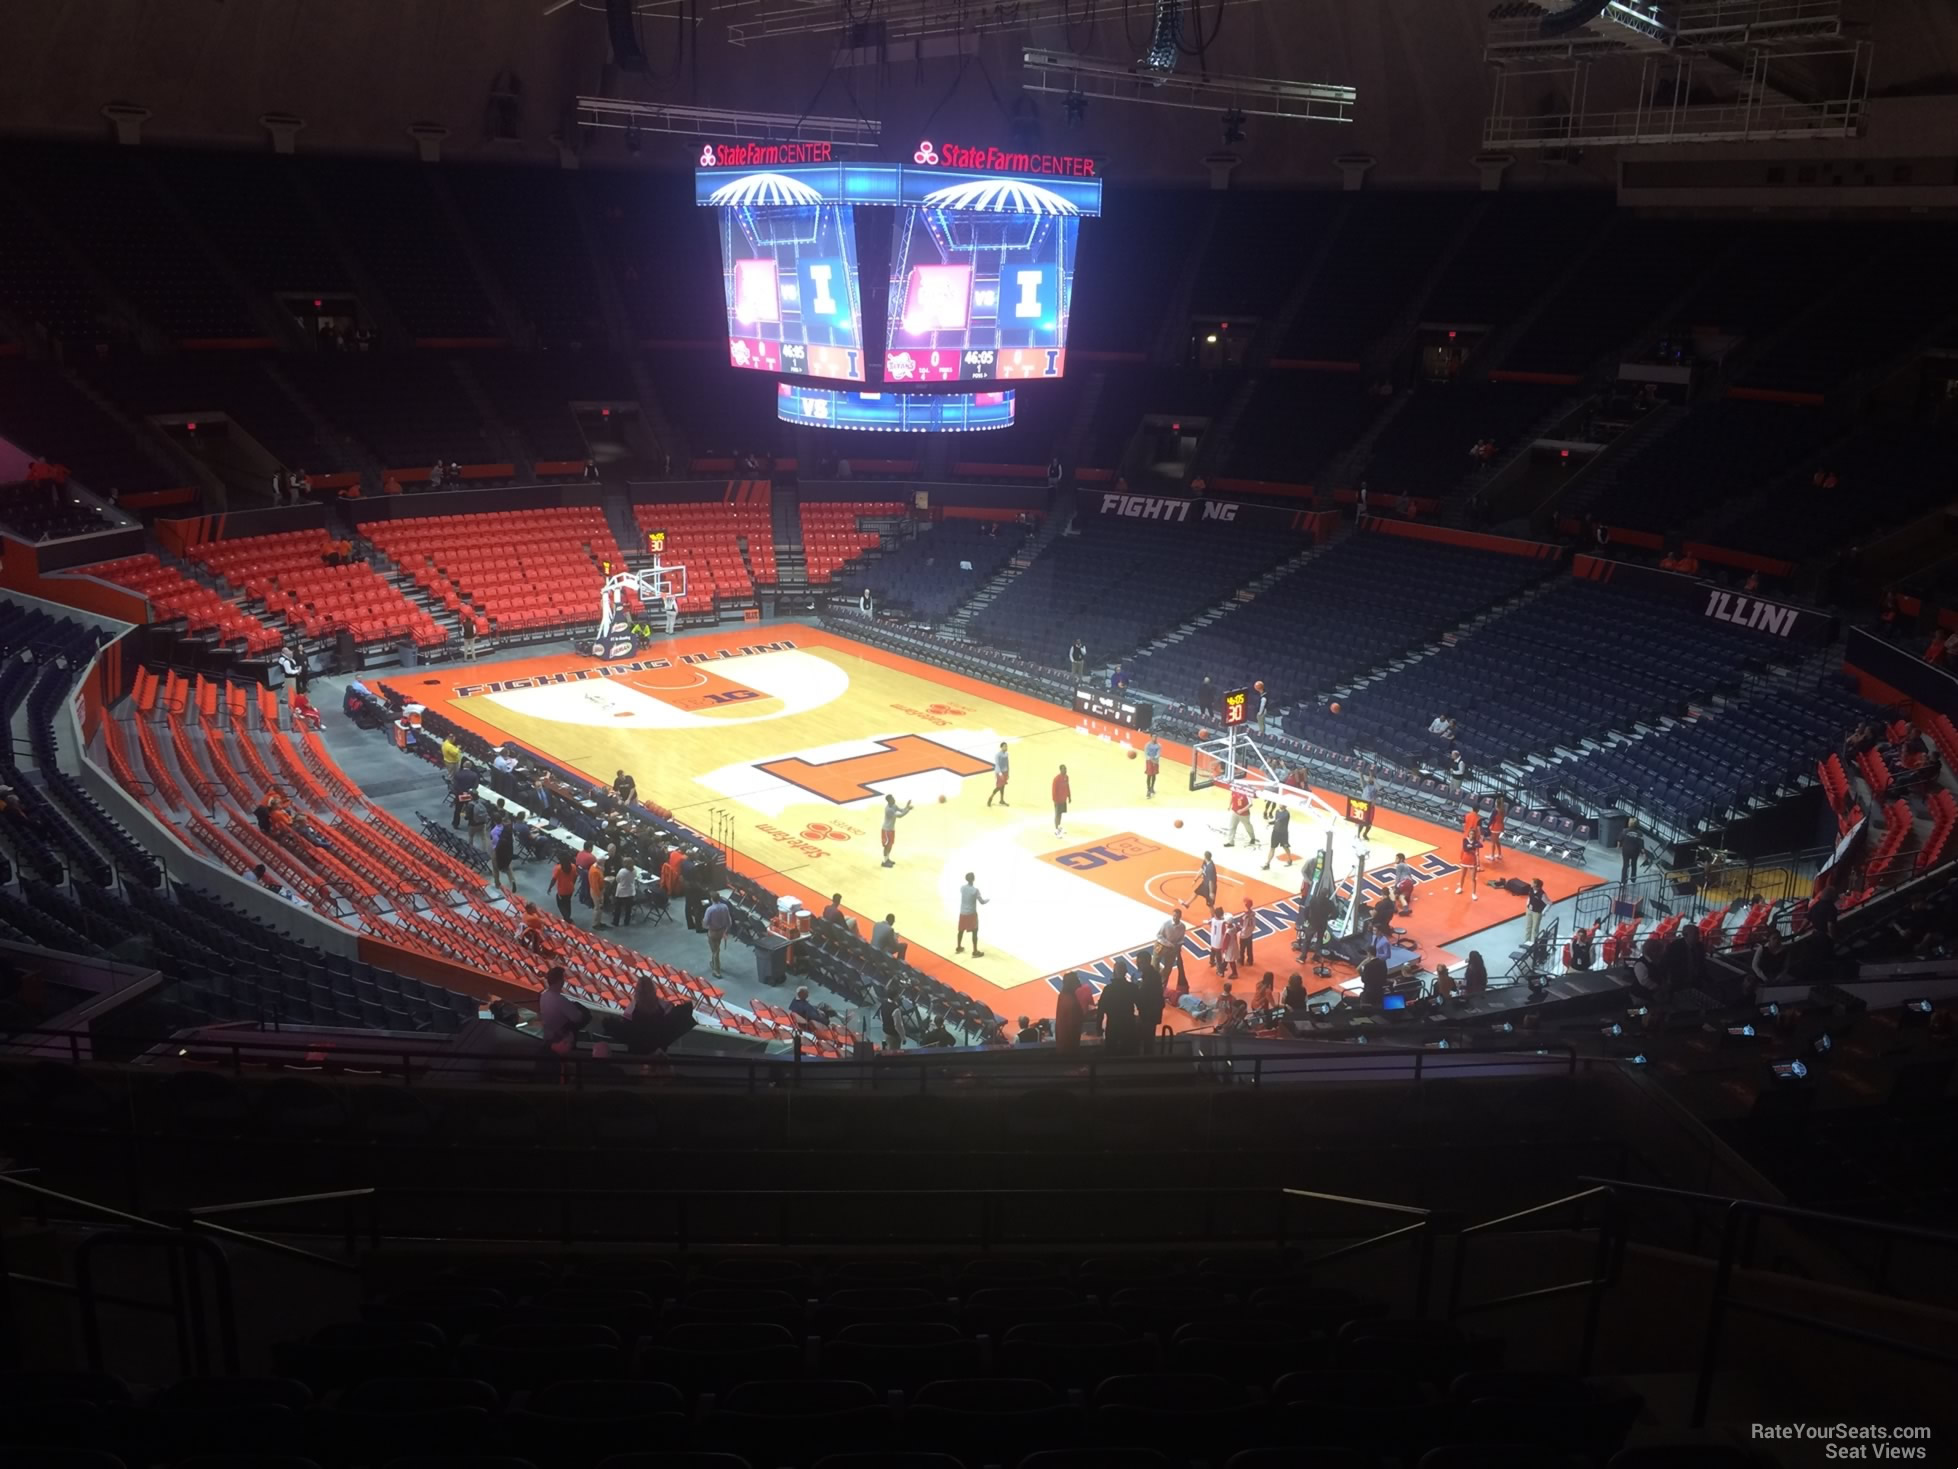 section 218, row 10 seat view  - state farm center